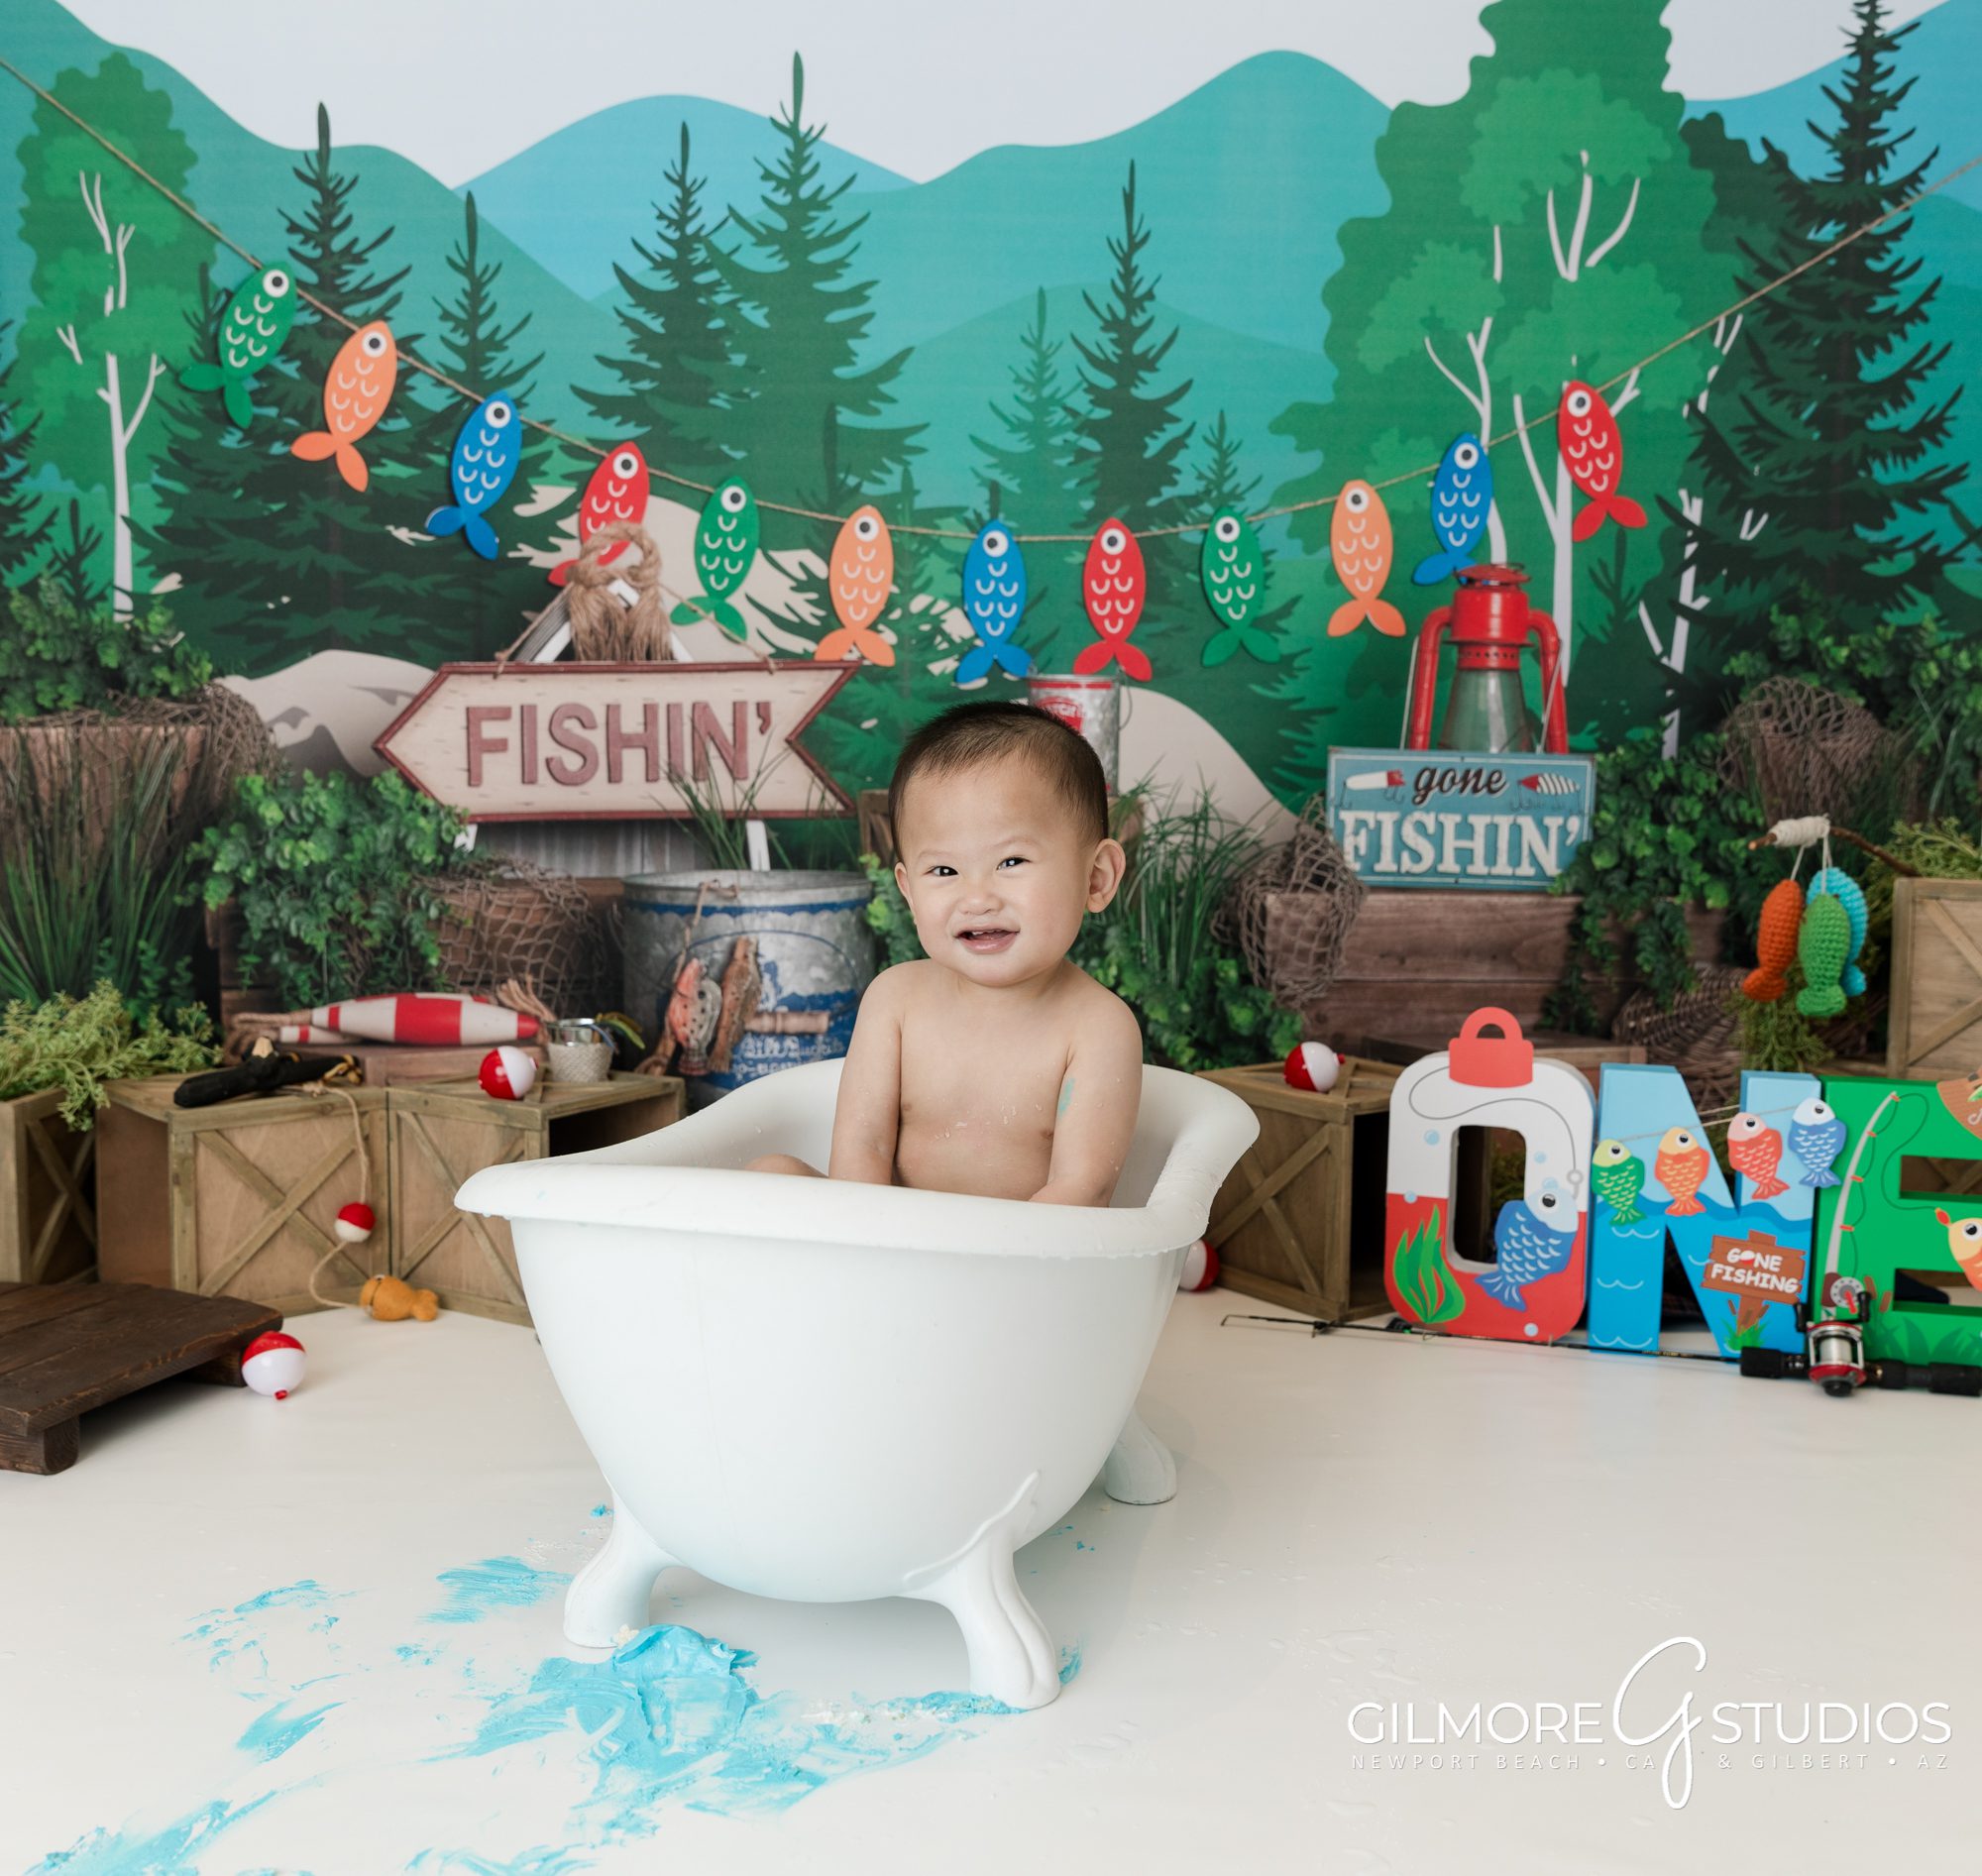 gilbert cake smash photography studio, 1st birthday, east valley kids photographer, gone fishin' first birthday photo session, fishing theme, one year old, cakes for boys birthday party, blue cake, bobbers, fishing pole, cute forest camping theme for boys, mini session, bath tub prop, kids photo props